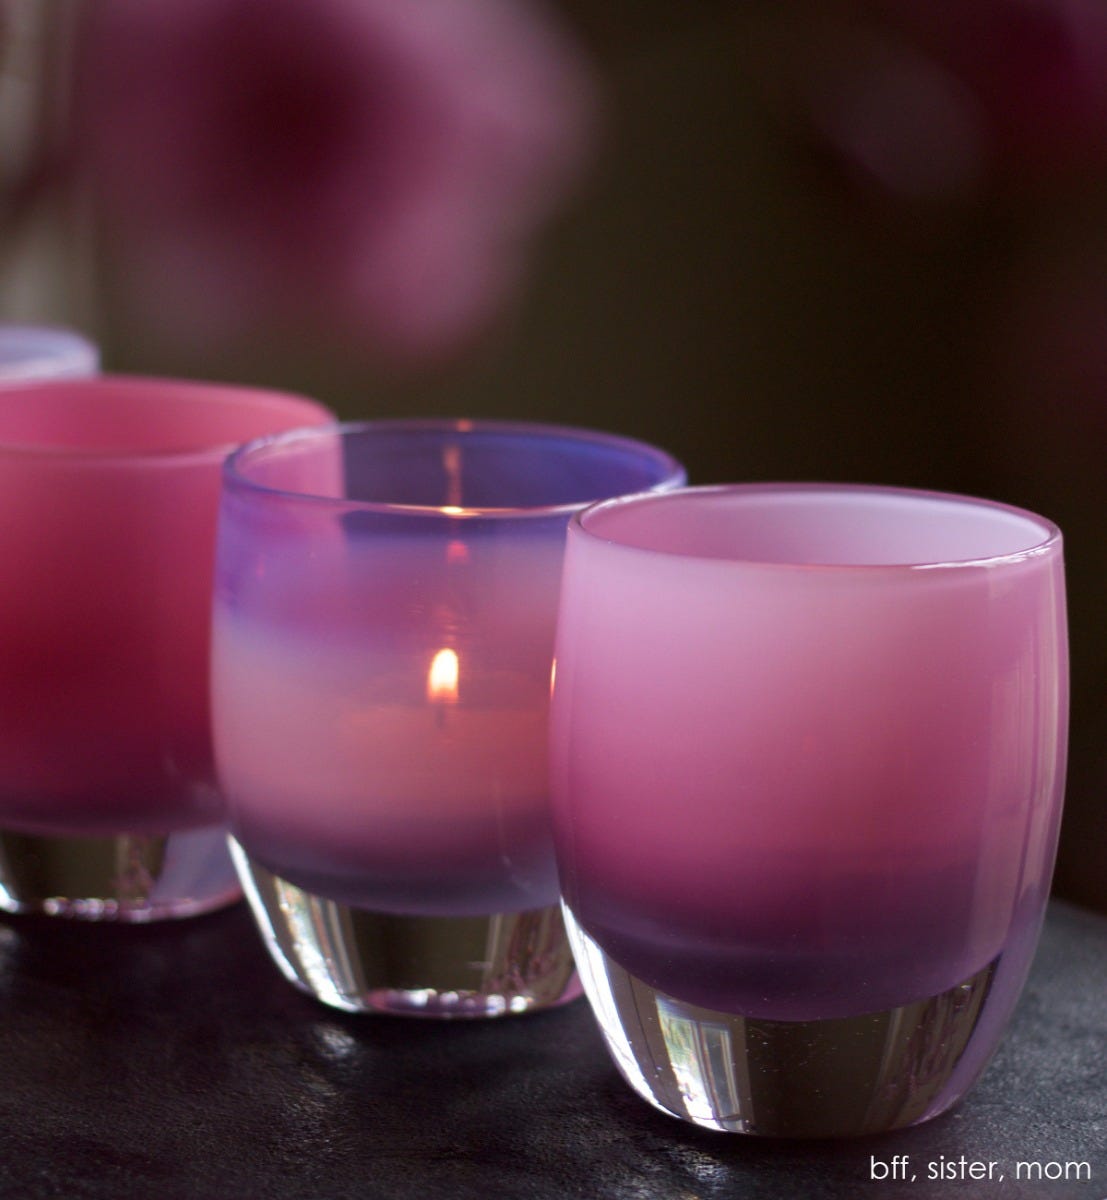 mom soft purple hand-blown glass votive candle holder. Paired with bff and sister.